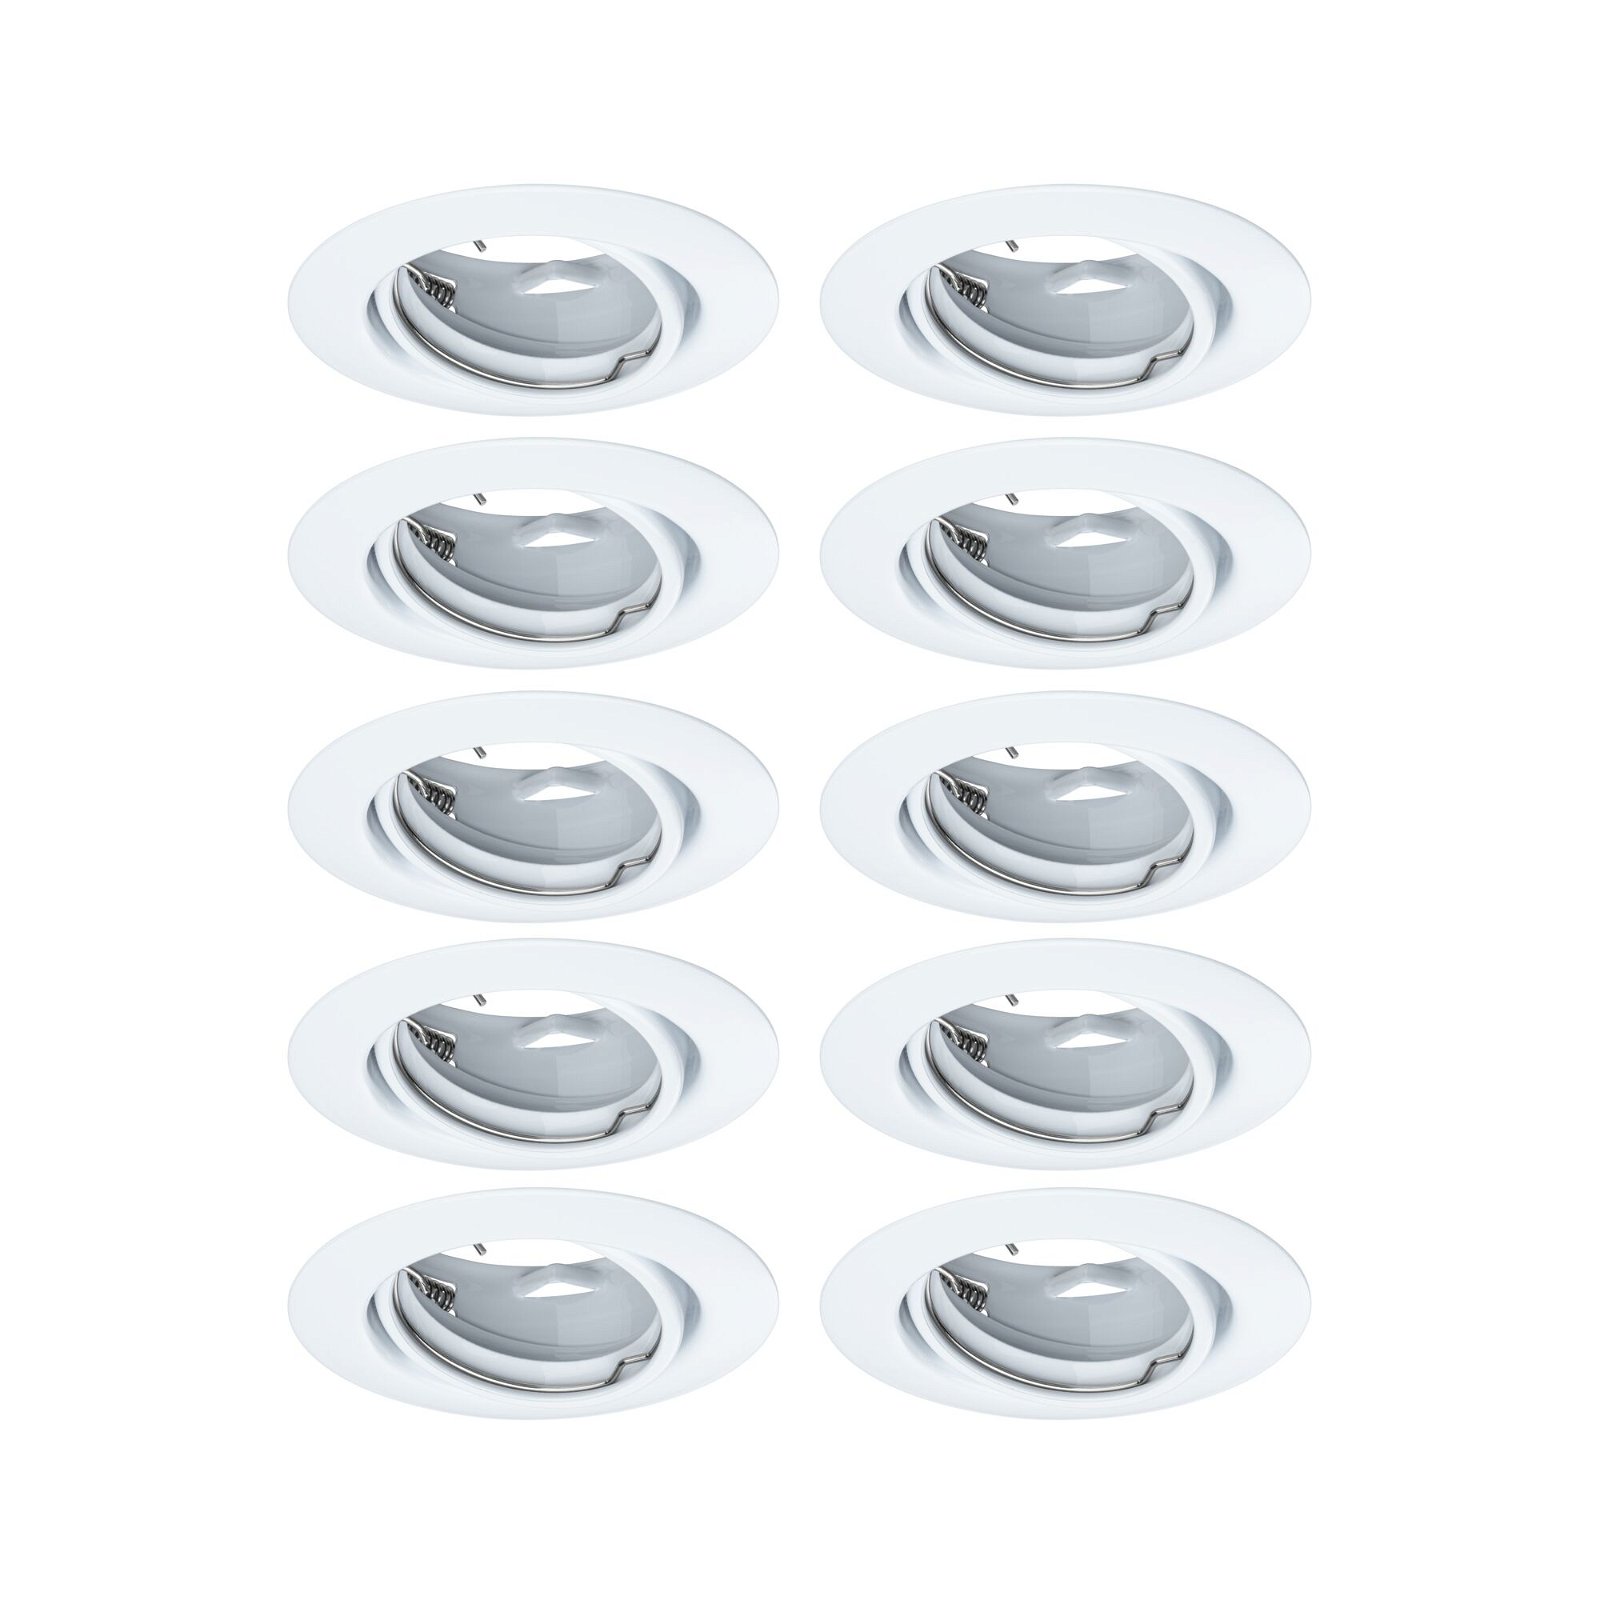 Recessed luminaire Base Basic Set Swivelling round 90mm 20° GU10 max. 10W 230V dimmable White